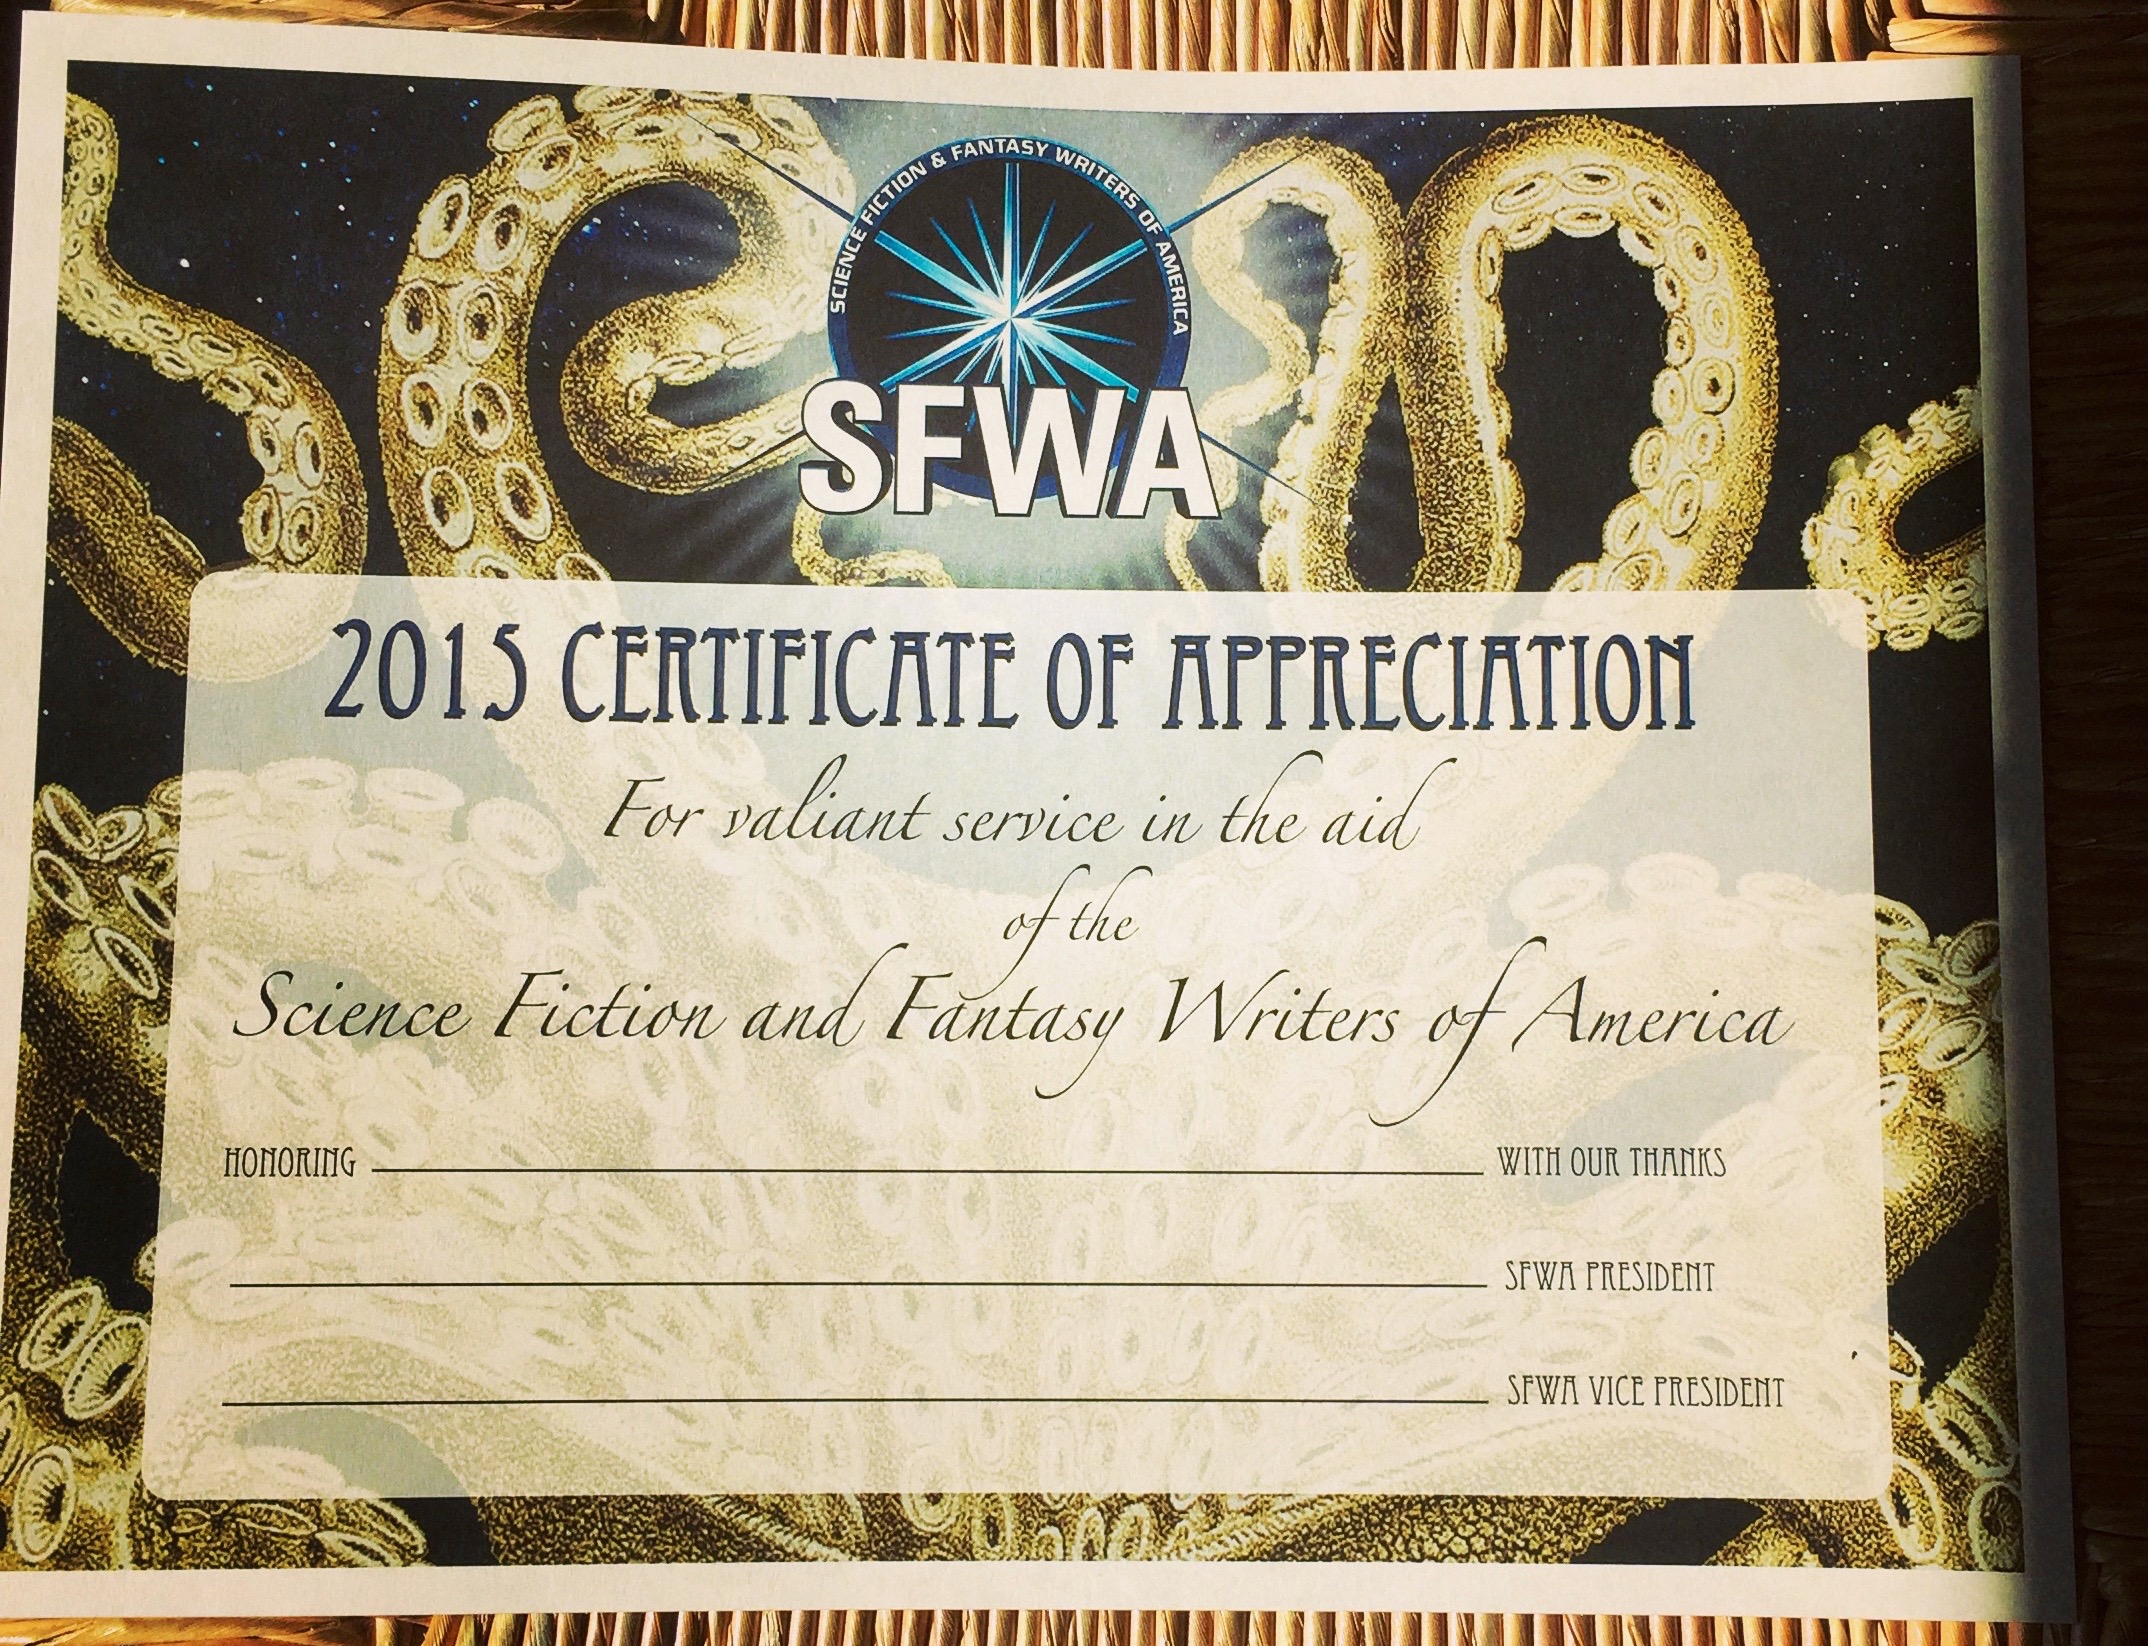 The 2015 SFWA Volunteer Appreciation certificate, created by Heather McDougal.